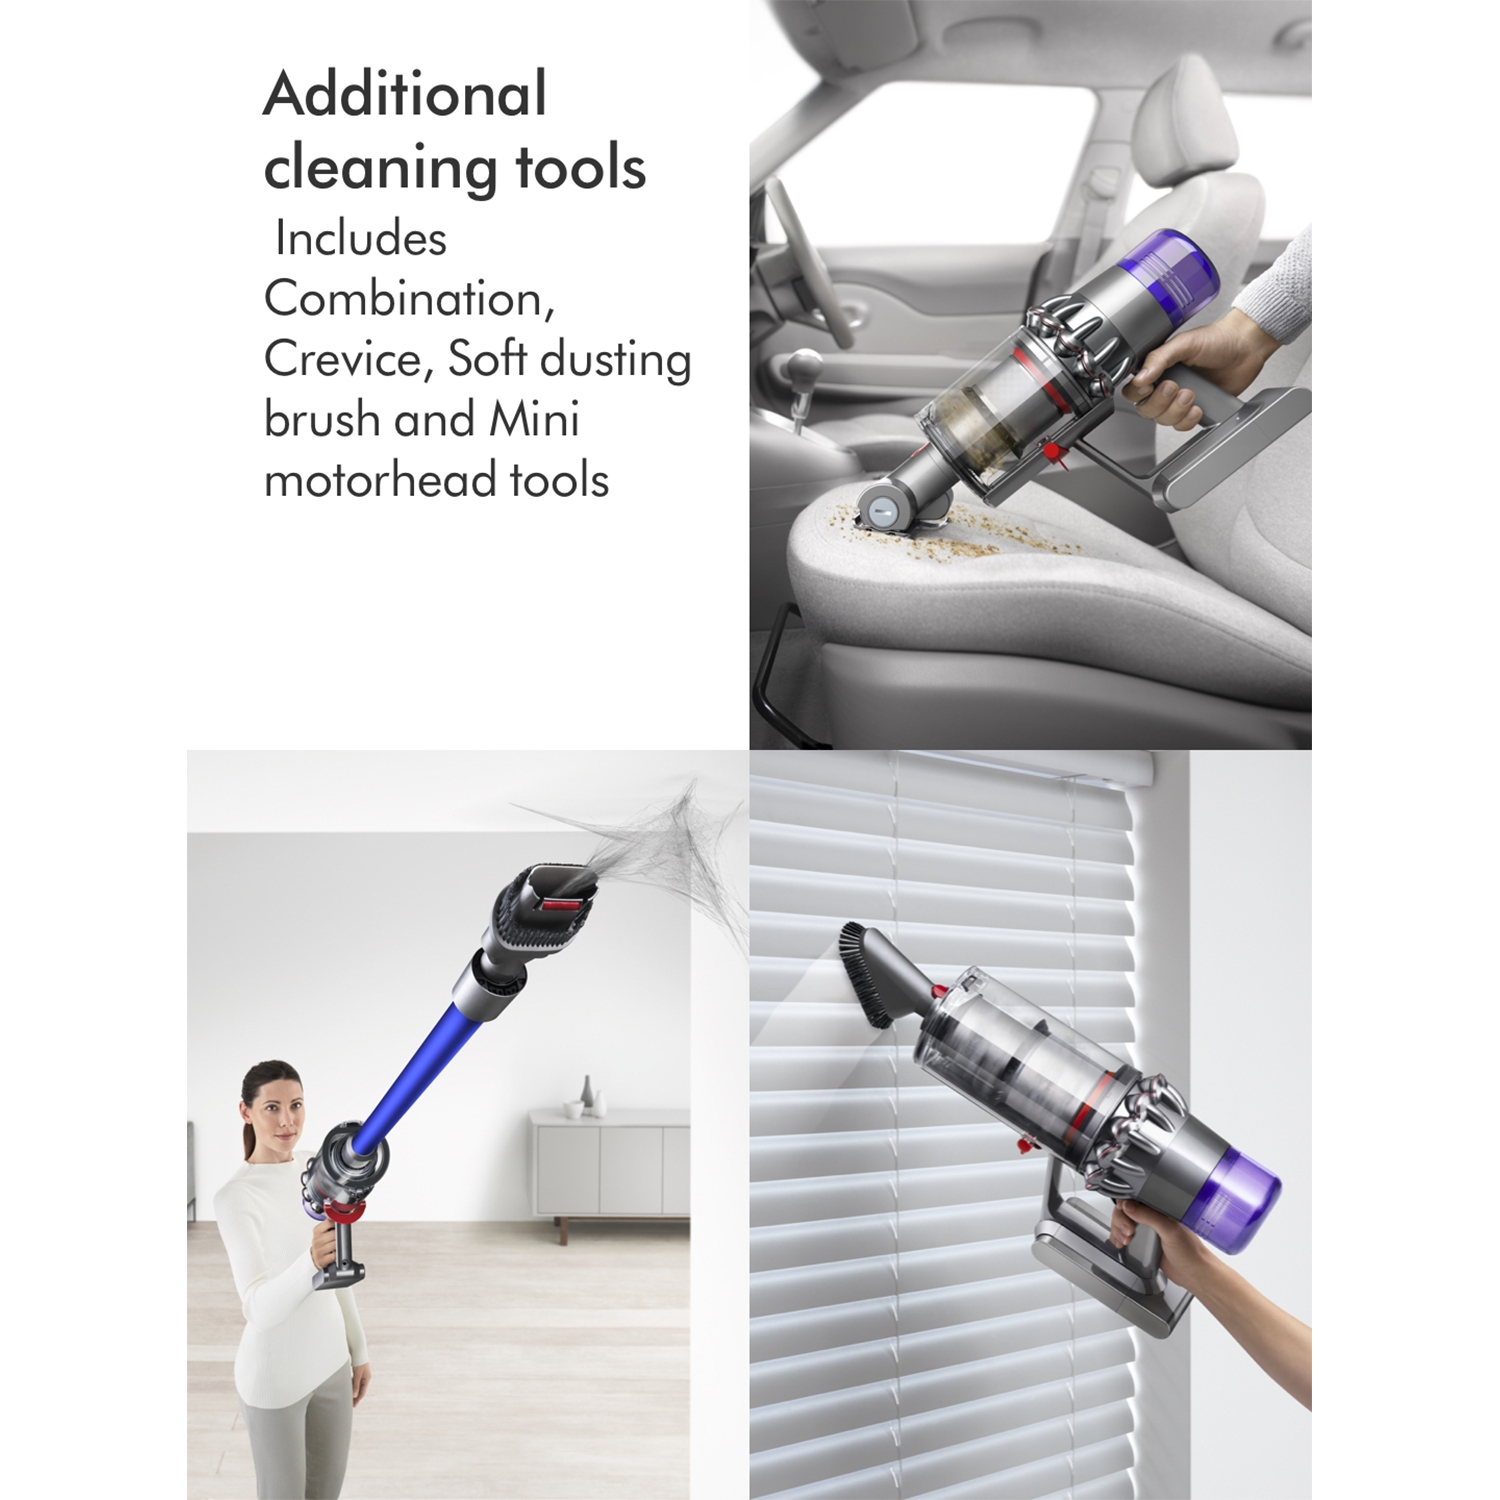 Dyson V11ABSOLUTE Cordless Vacuum Cleaner - 60 Minute Run Time - ONE ONLY, DISPLAY MODEL - 7